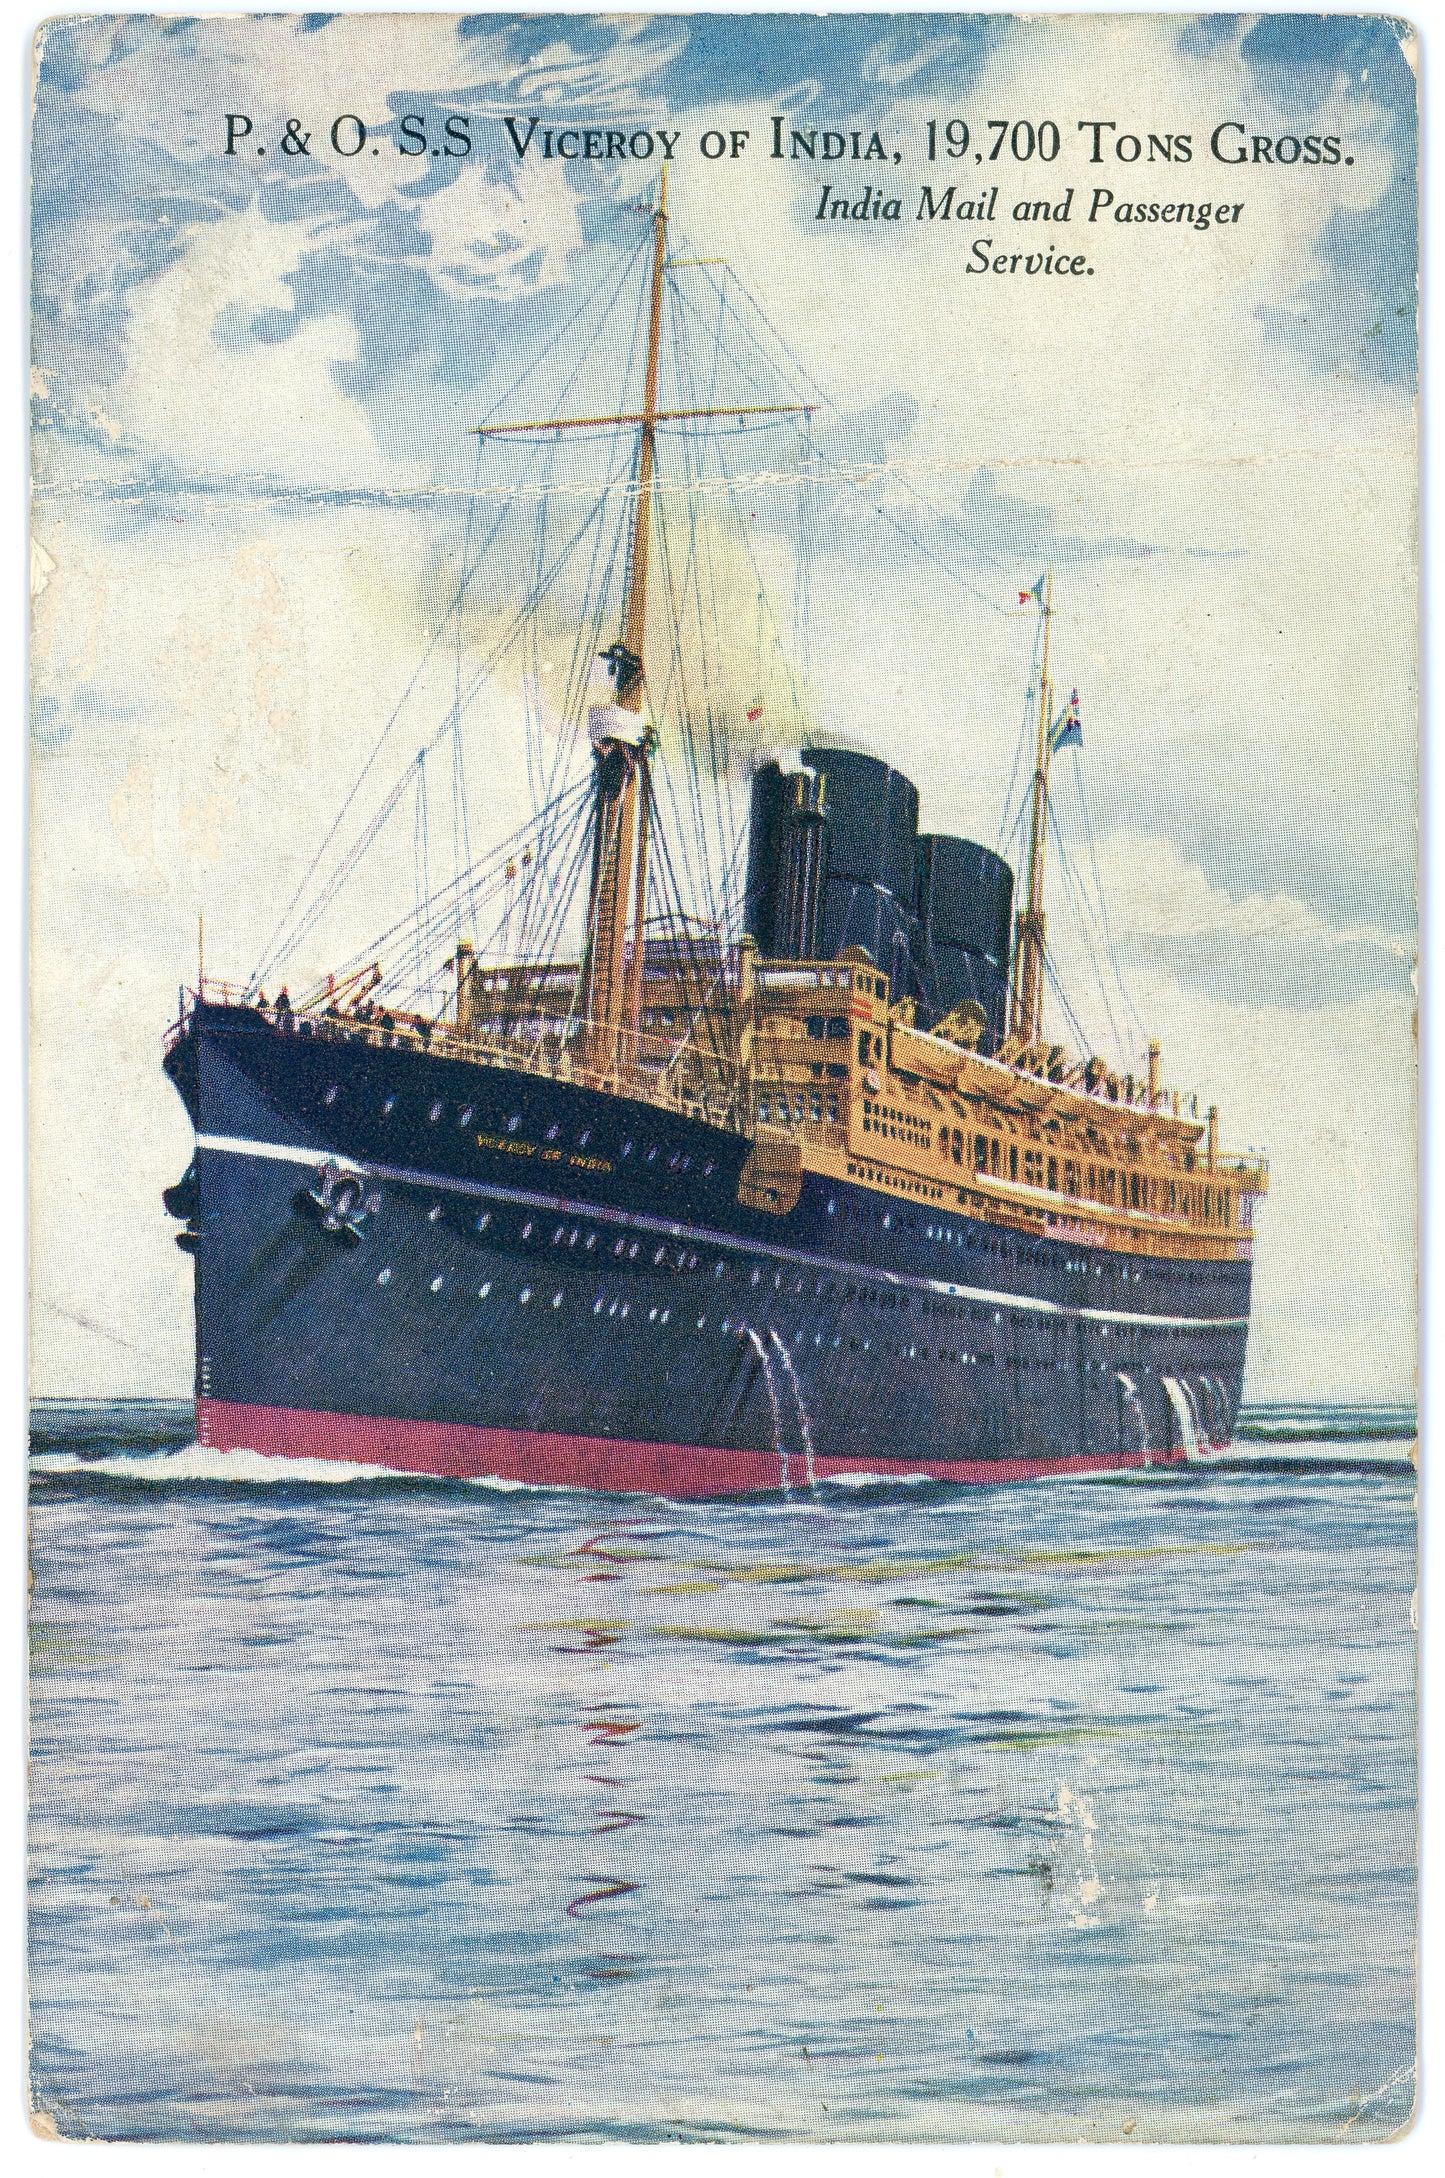 P & O "Viceroy of India"